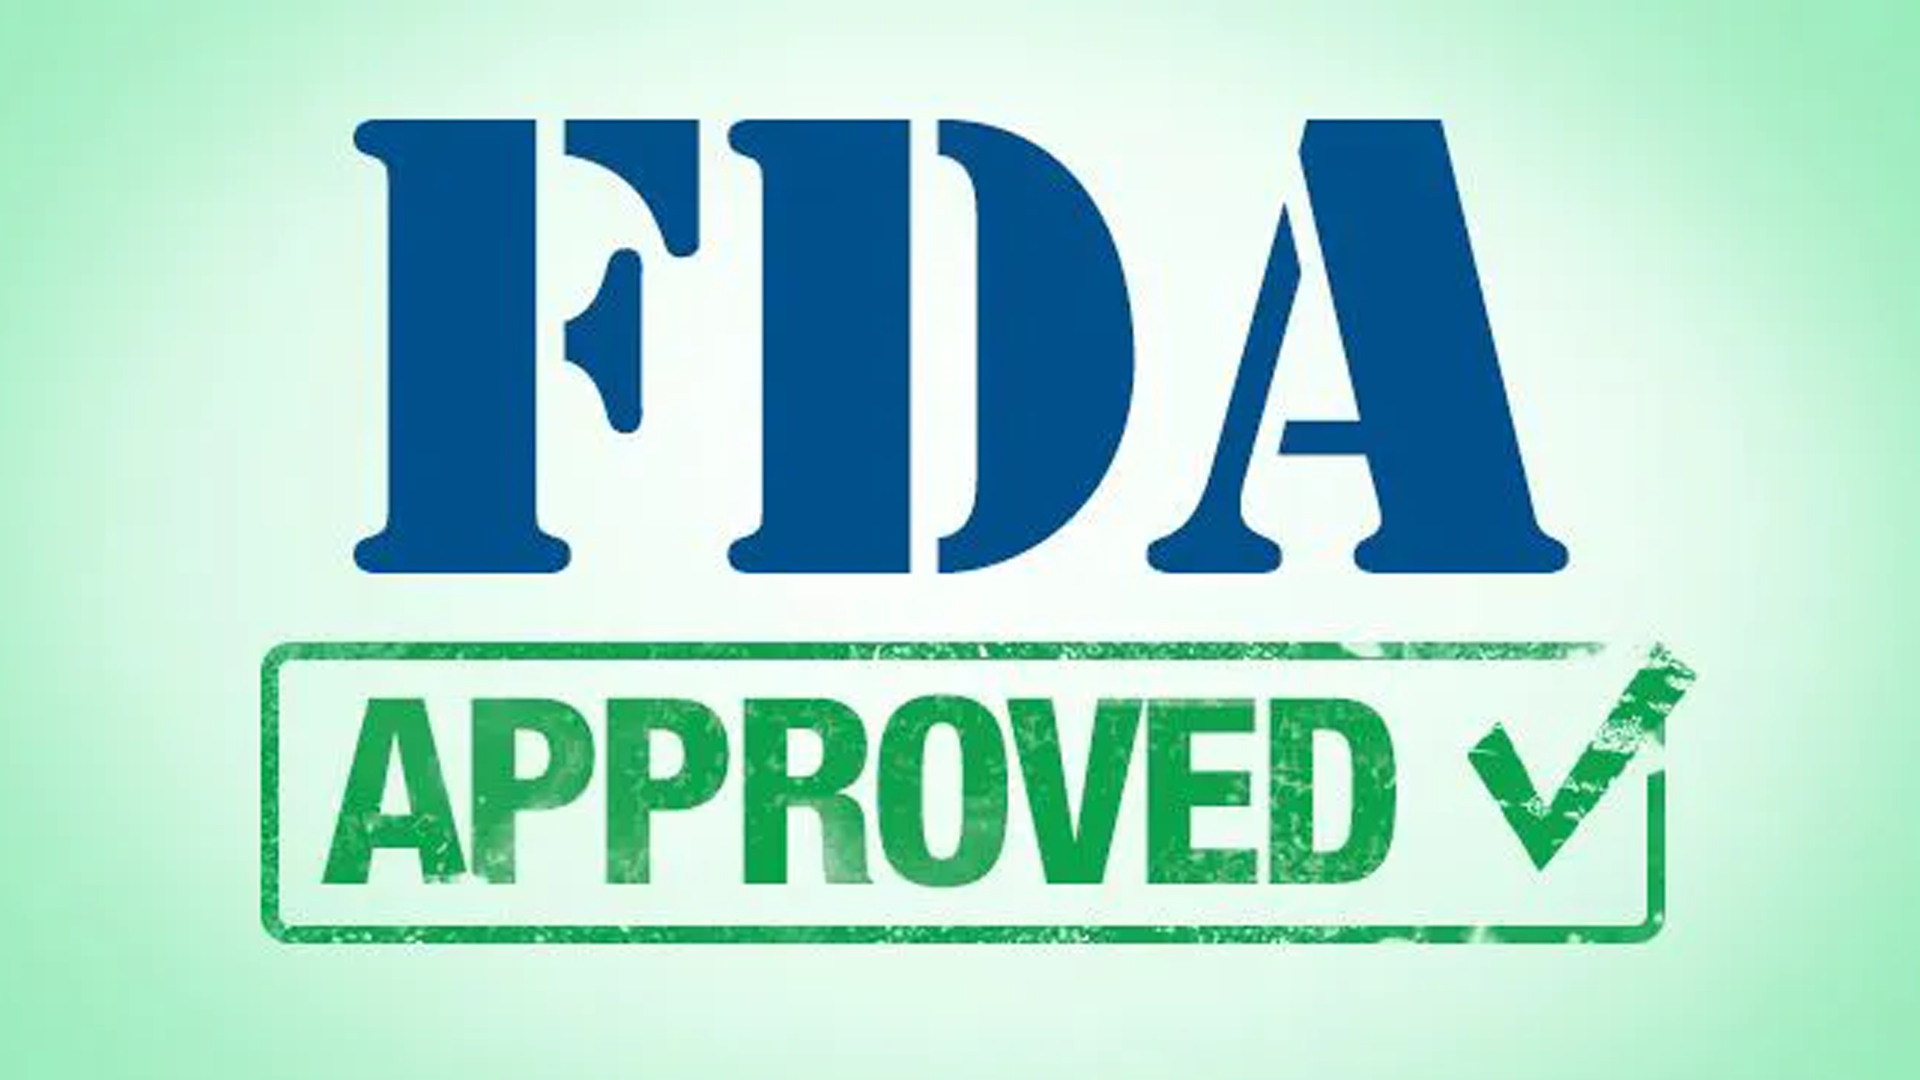 Image of FDA Approved in blue and green.